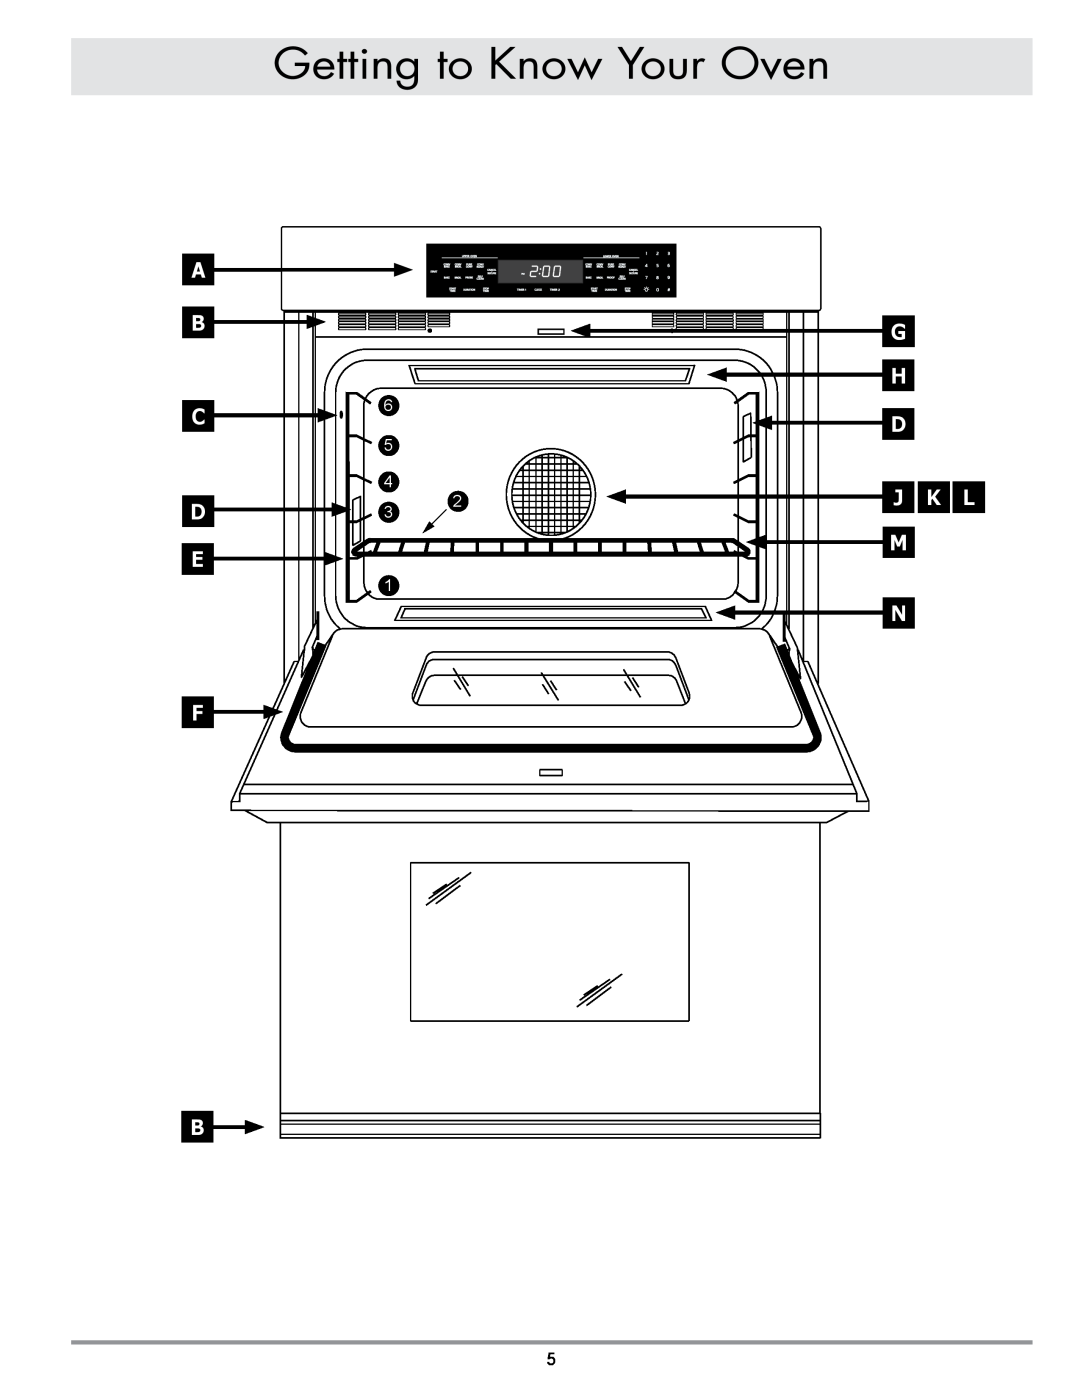 Dacor MORD230 manual Getting to Know Your Oven, A B C D E F, G H D J K L M N 